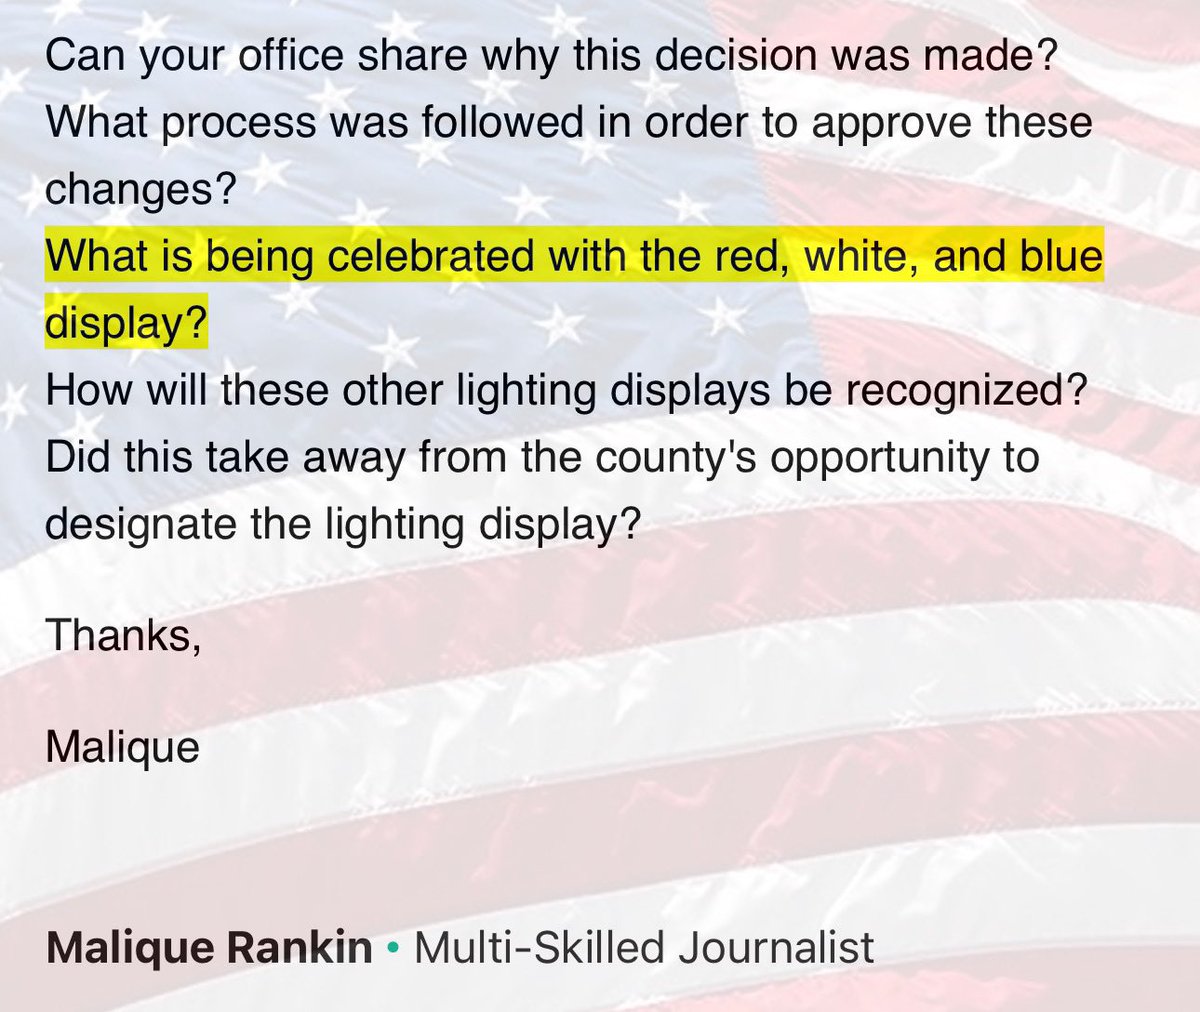 If you want to see the best question that I’ve received in weeks, check out the one I highlighted in this email about the @MyFDOT bridge lighting from @MaliqueRankin over @10TampaBay. An absolute all-timer, tbh. *Old Glory background added for effect*